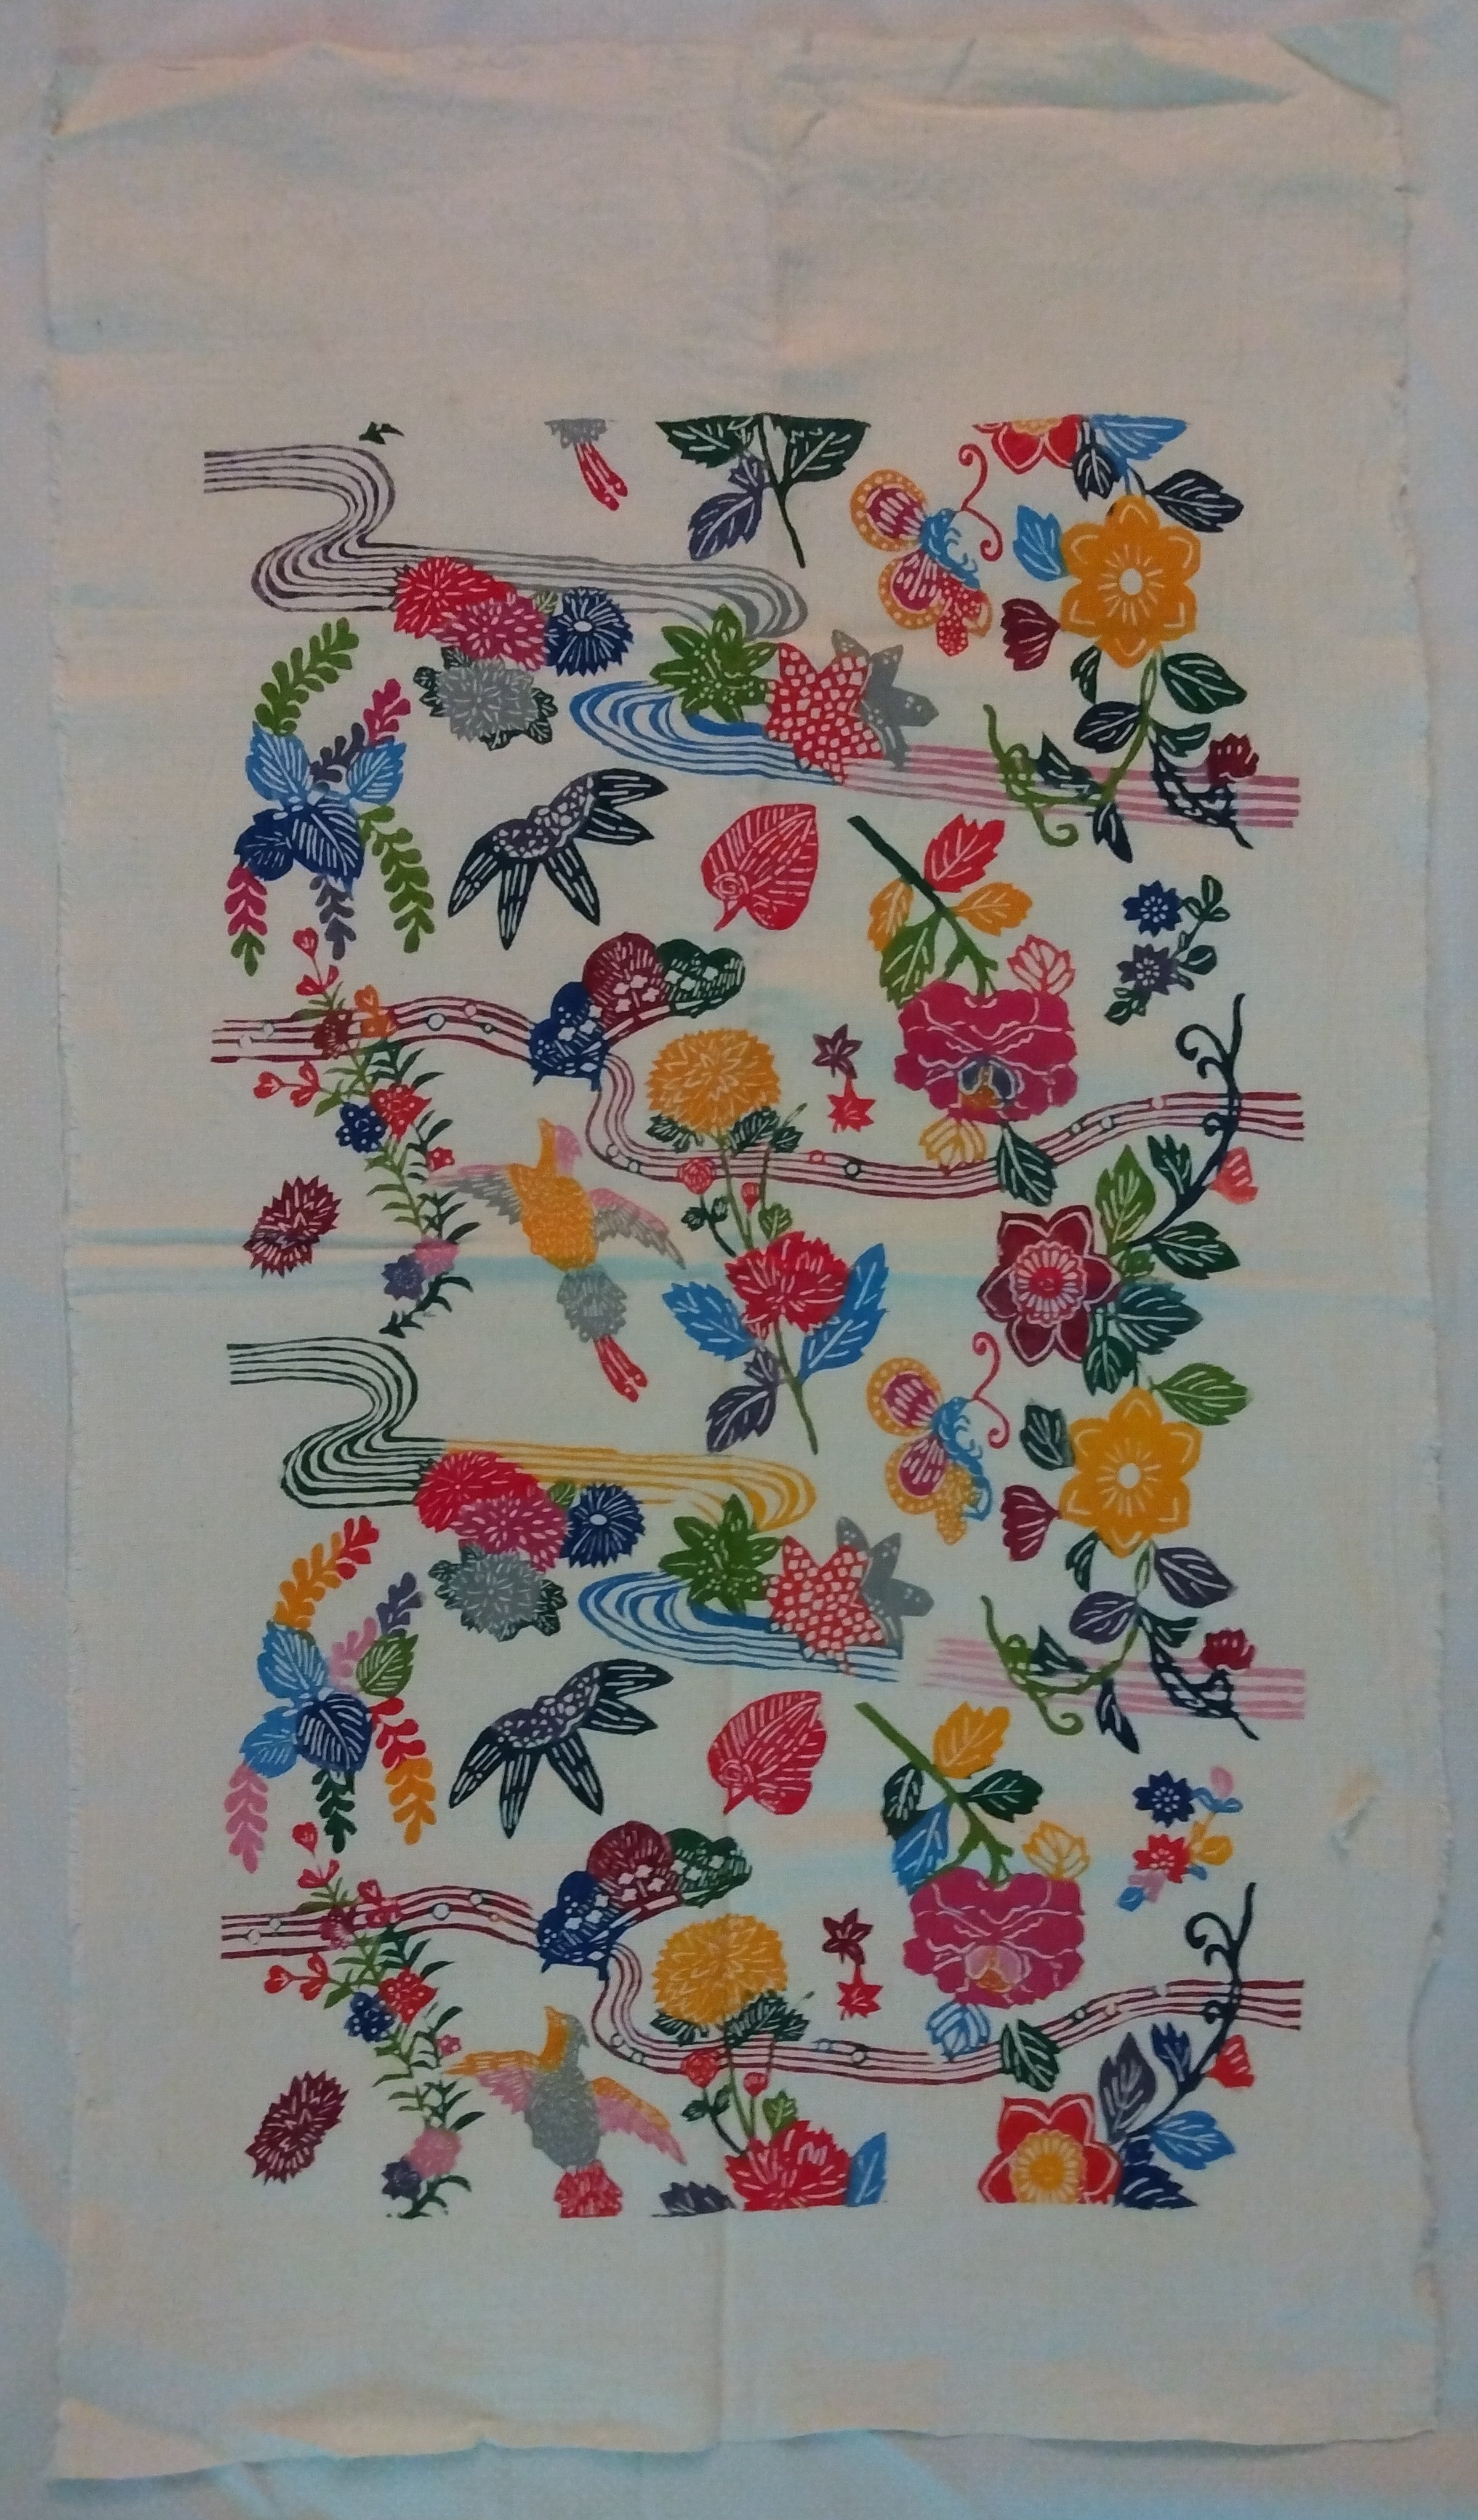 Okinawa Bingata Dyed Cloth with Flora and Fauna. Vintage Japanese Textile; Thiel Collection